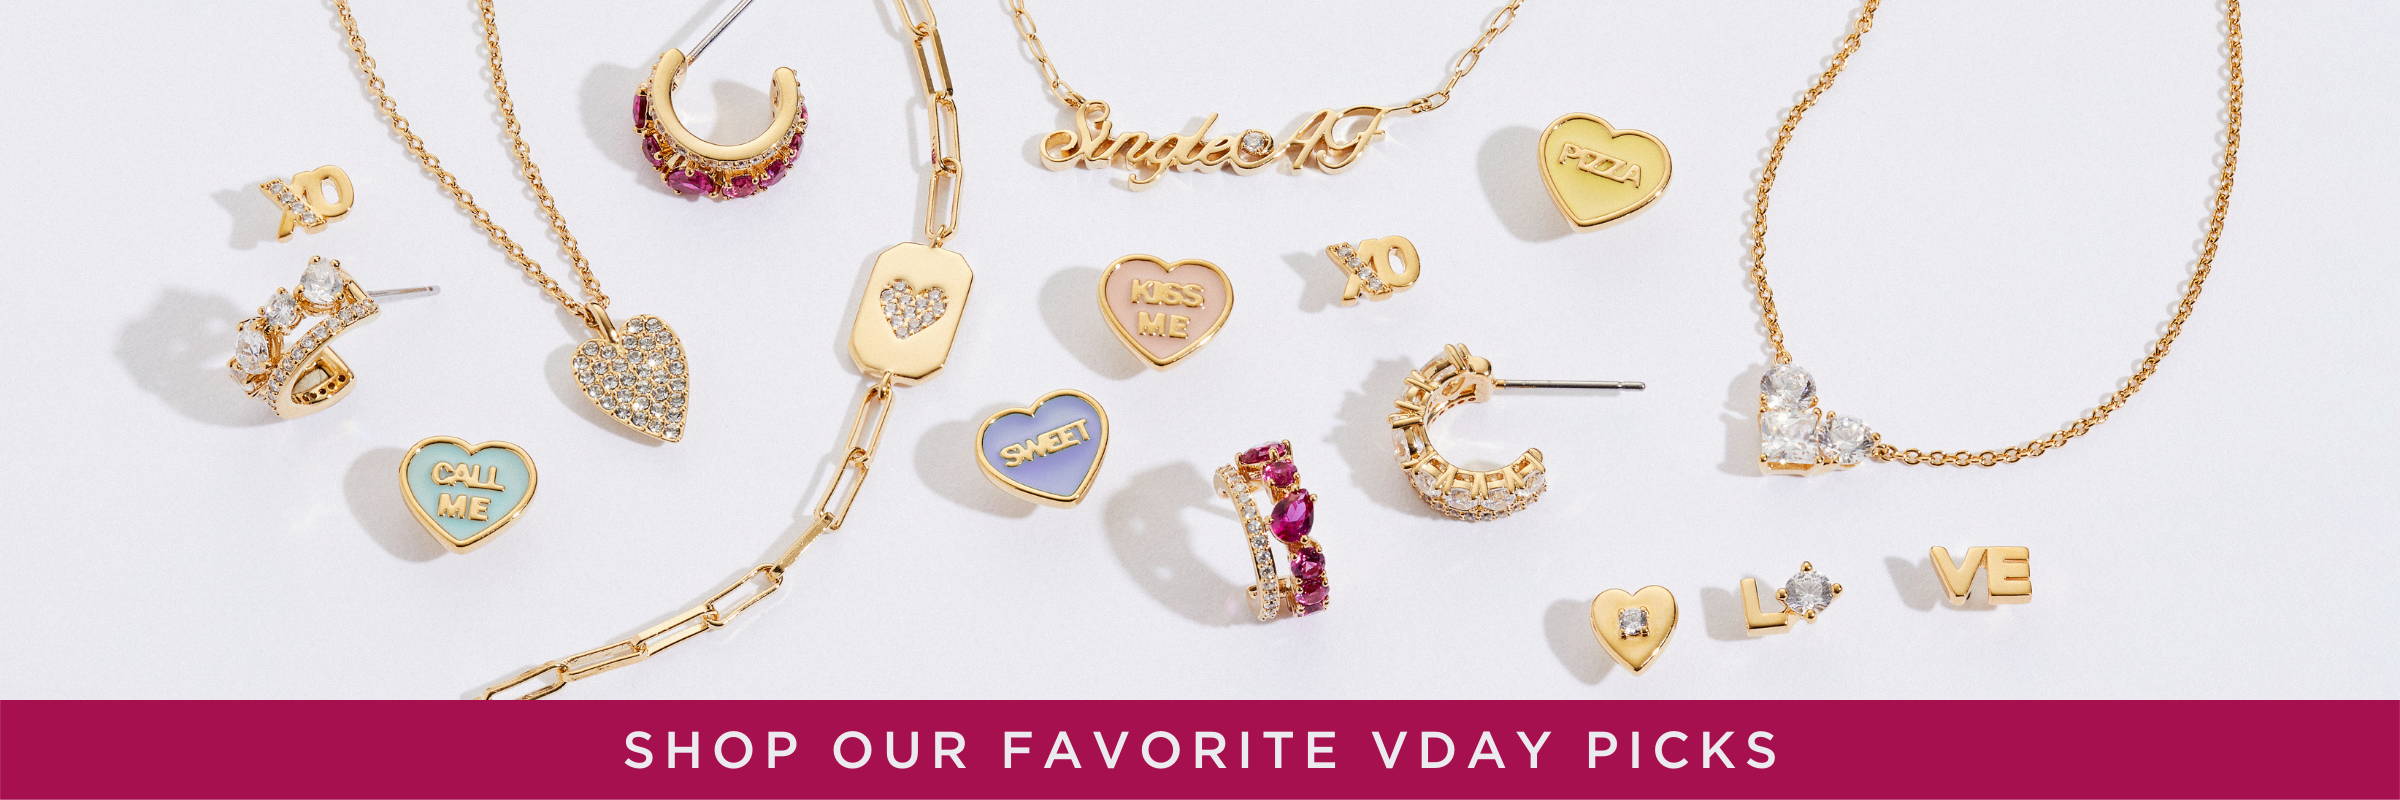 Image of assorted heart-themed jewelry for Valentine's Day.